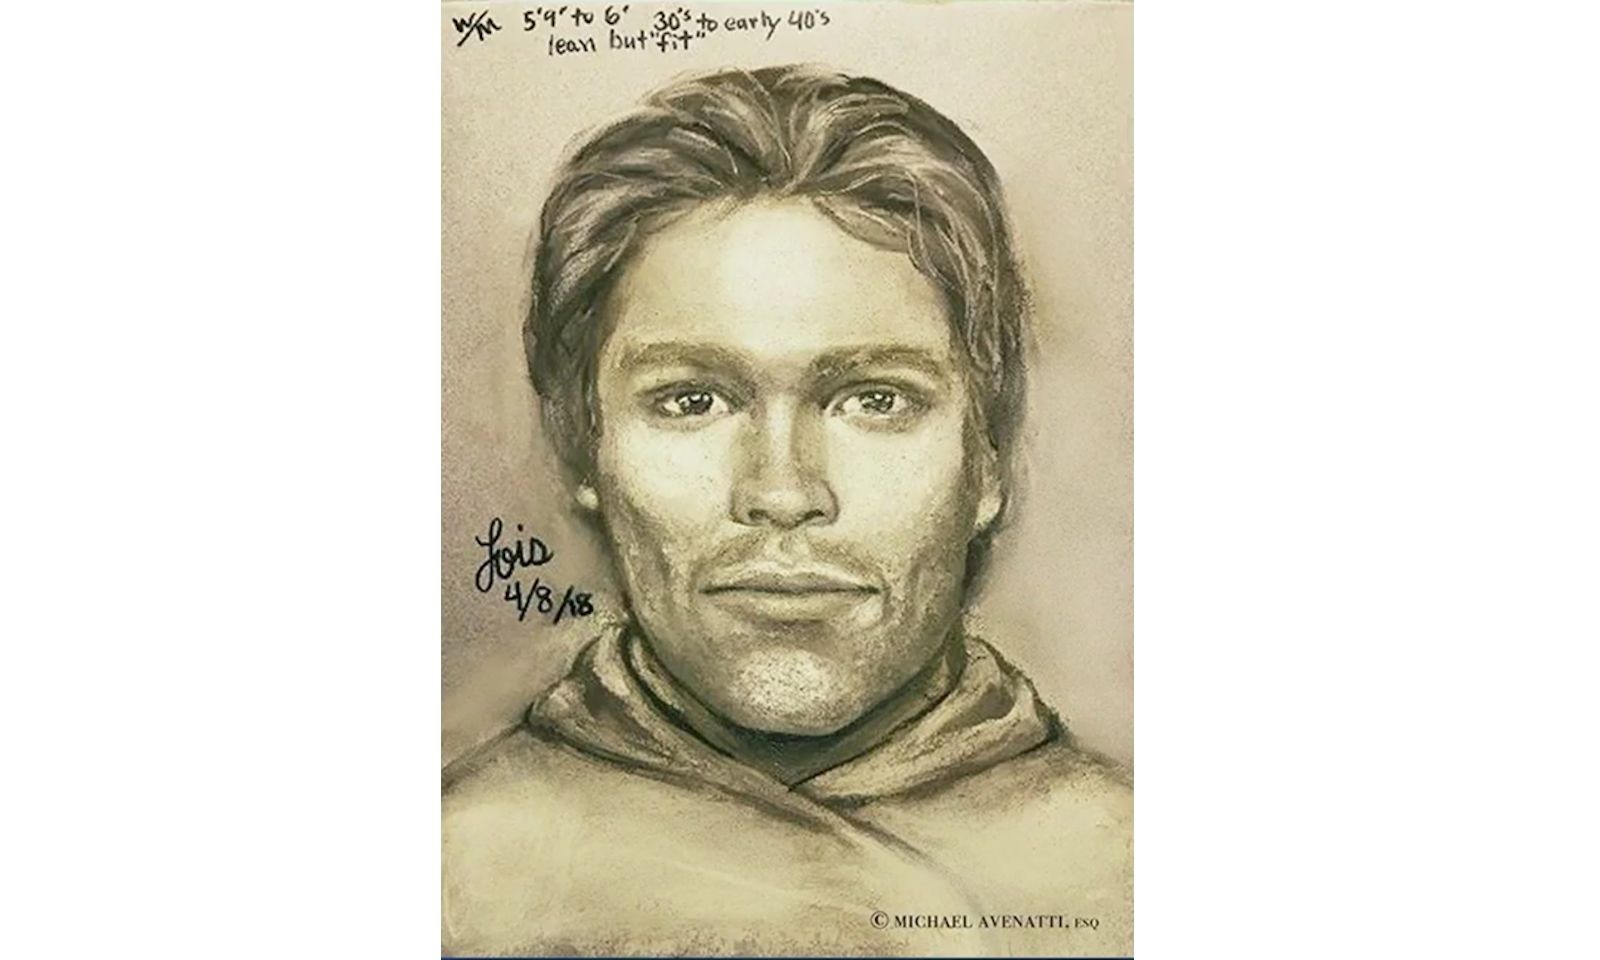 Sketch of Stormy Daniels Threat Suspect Released on ‘The View’